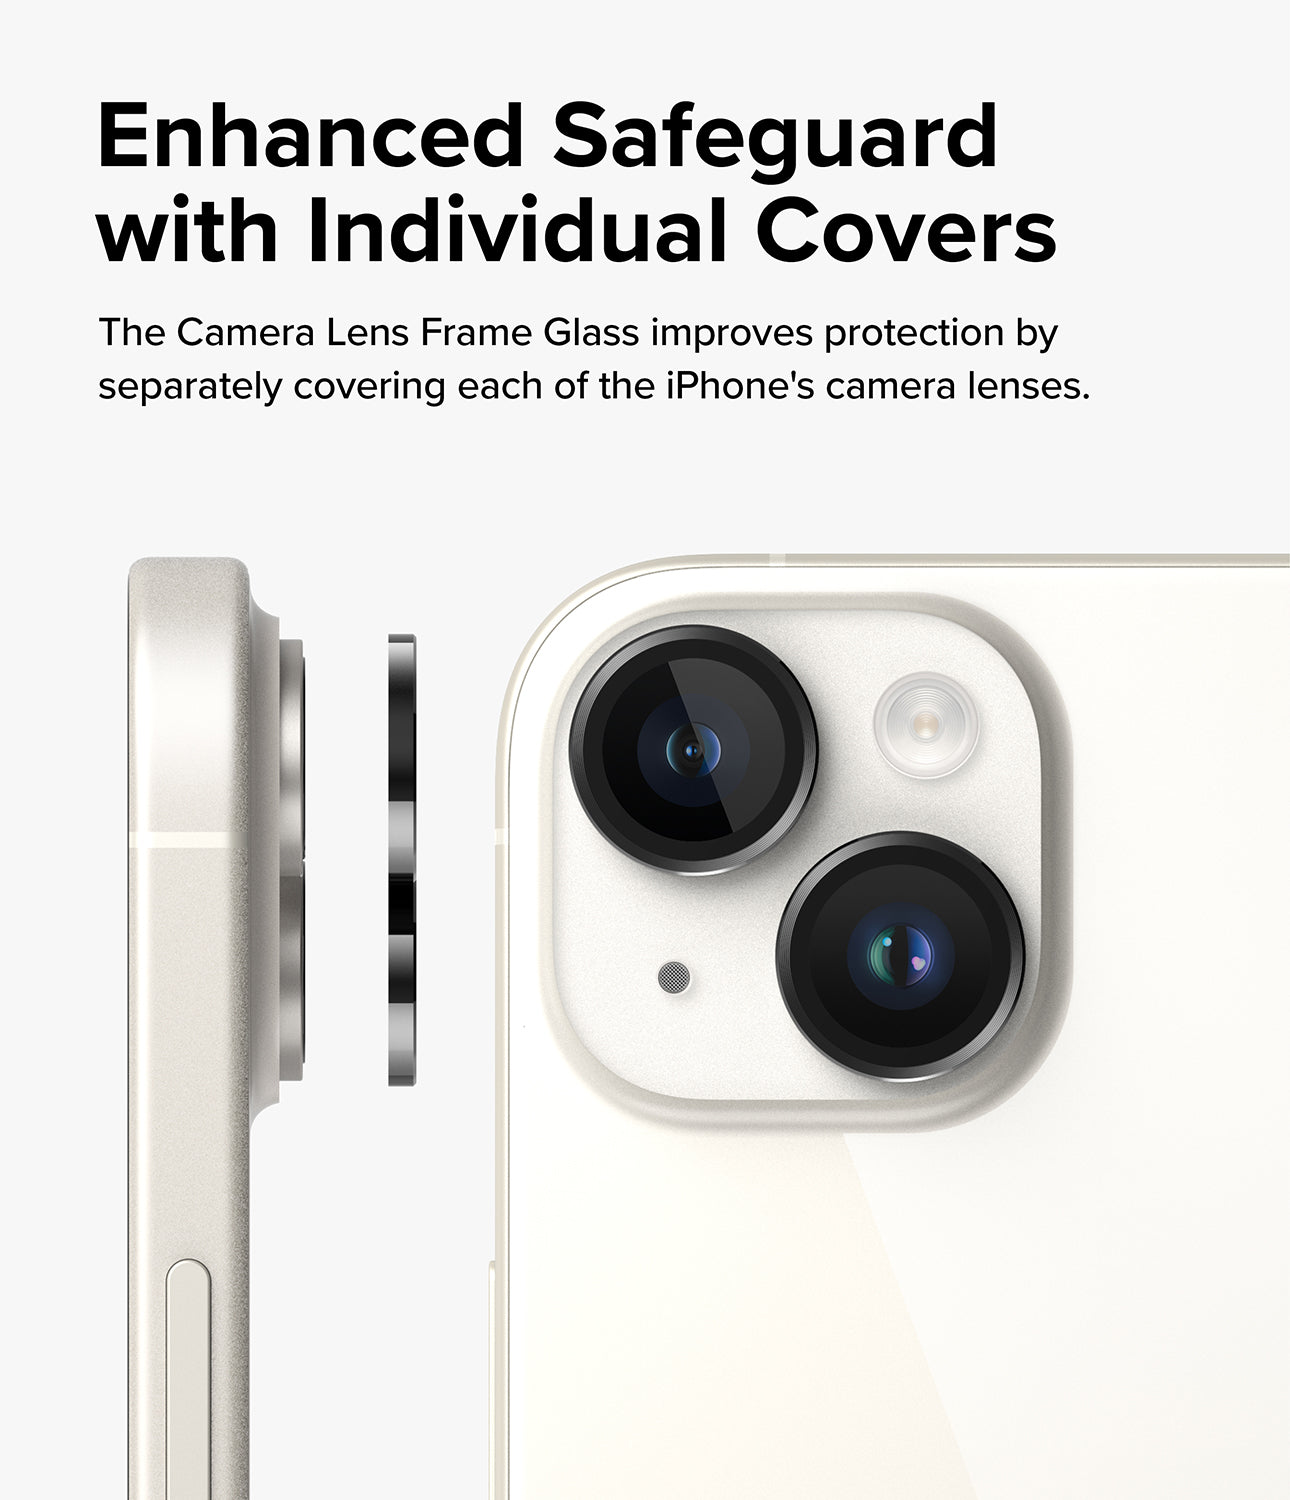 iPhone 15 Plus / iPhone 15 | Camera Lens Frame Glass